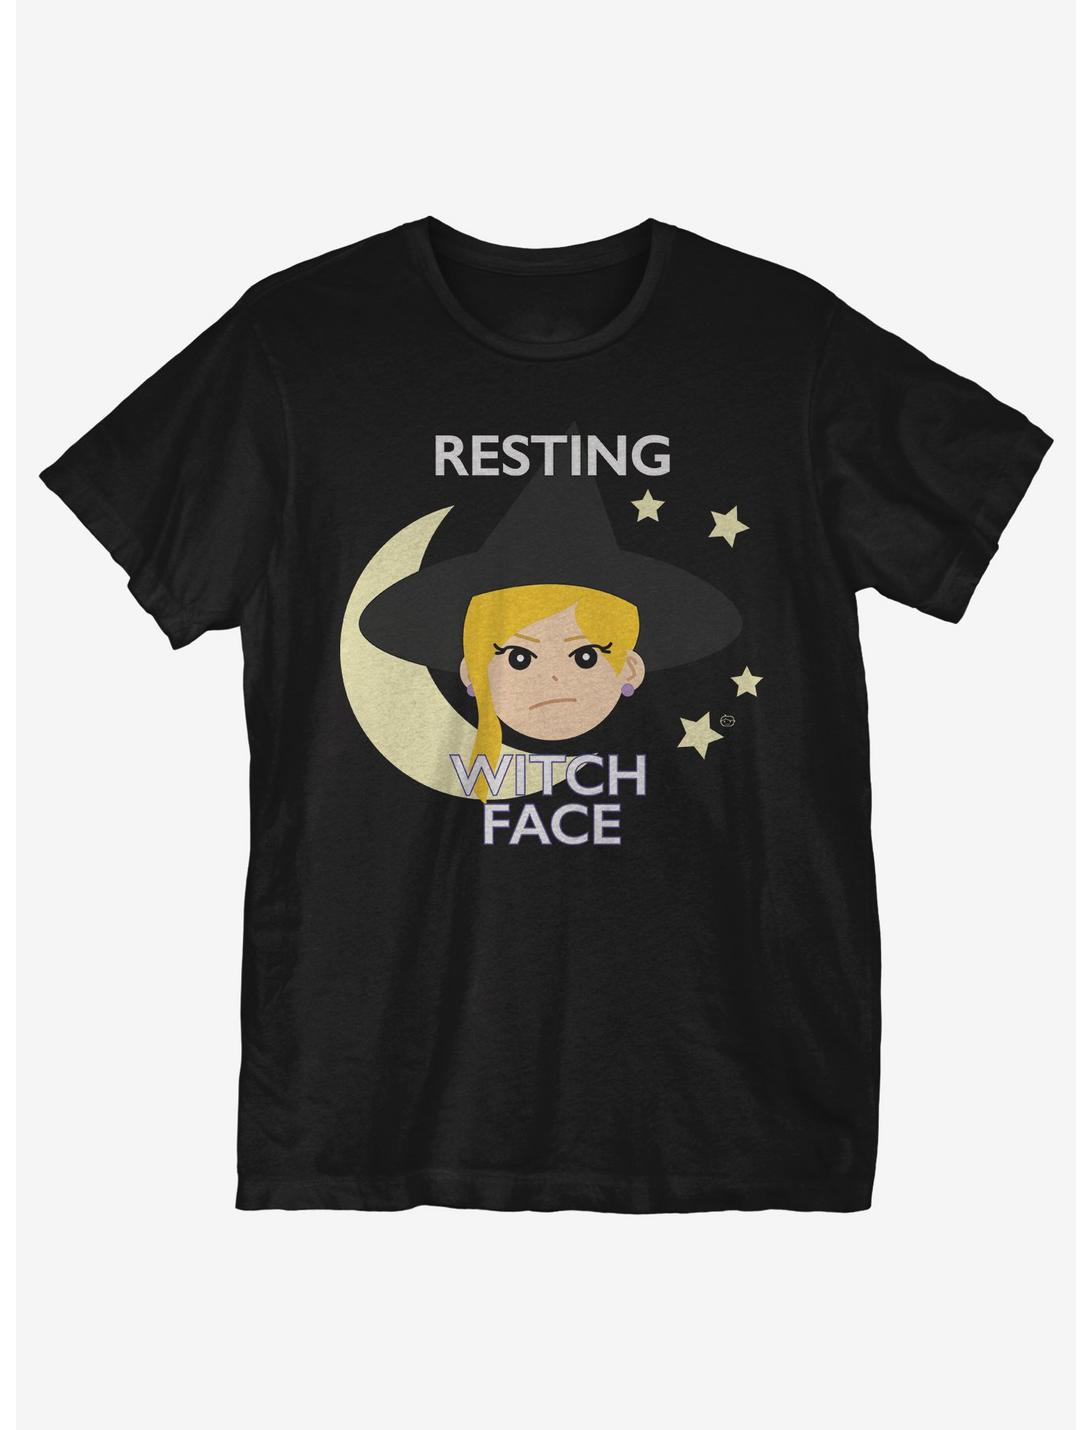 Resting Witch Face T-Shirt, BLACK, hi-res